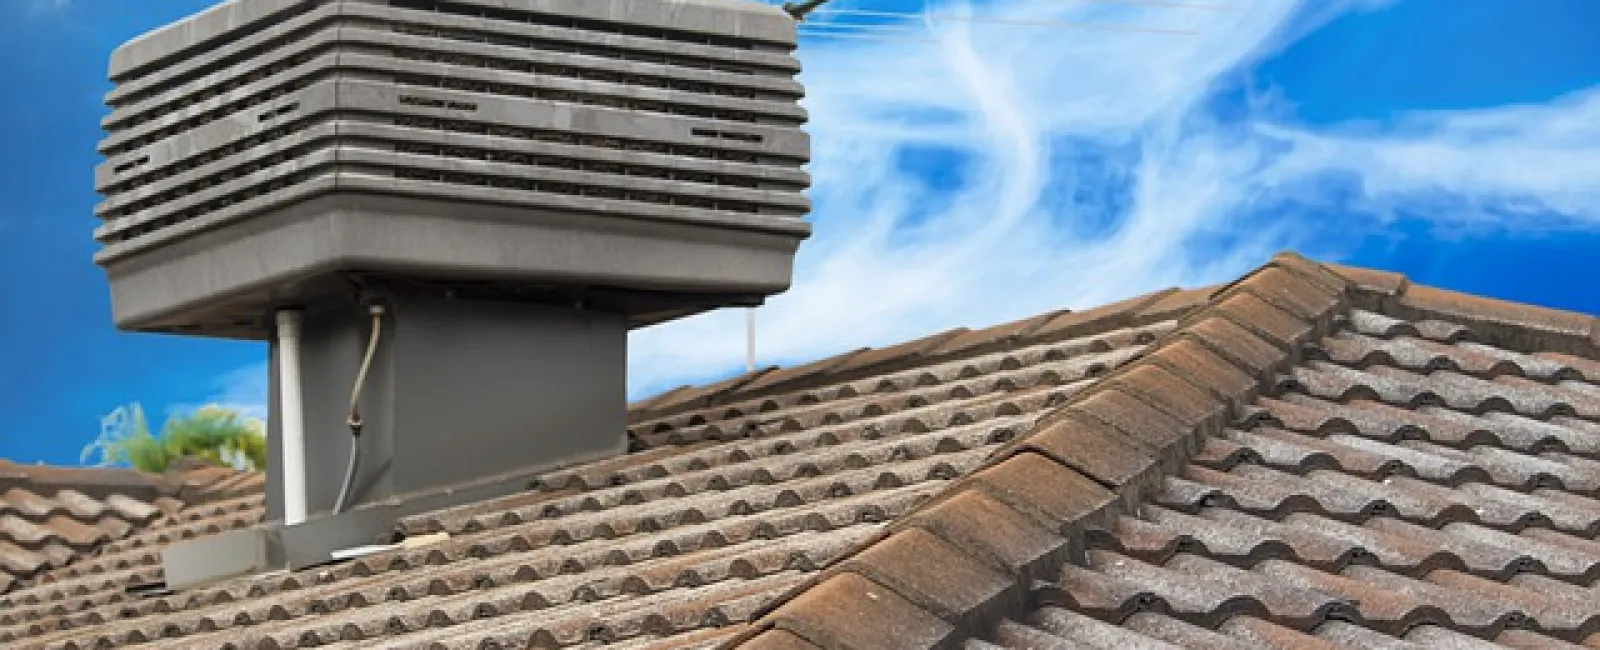 How the Intense Heat of Summer Could Affect Your Roof